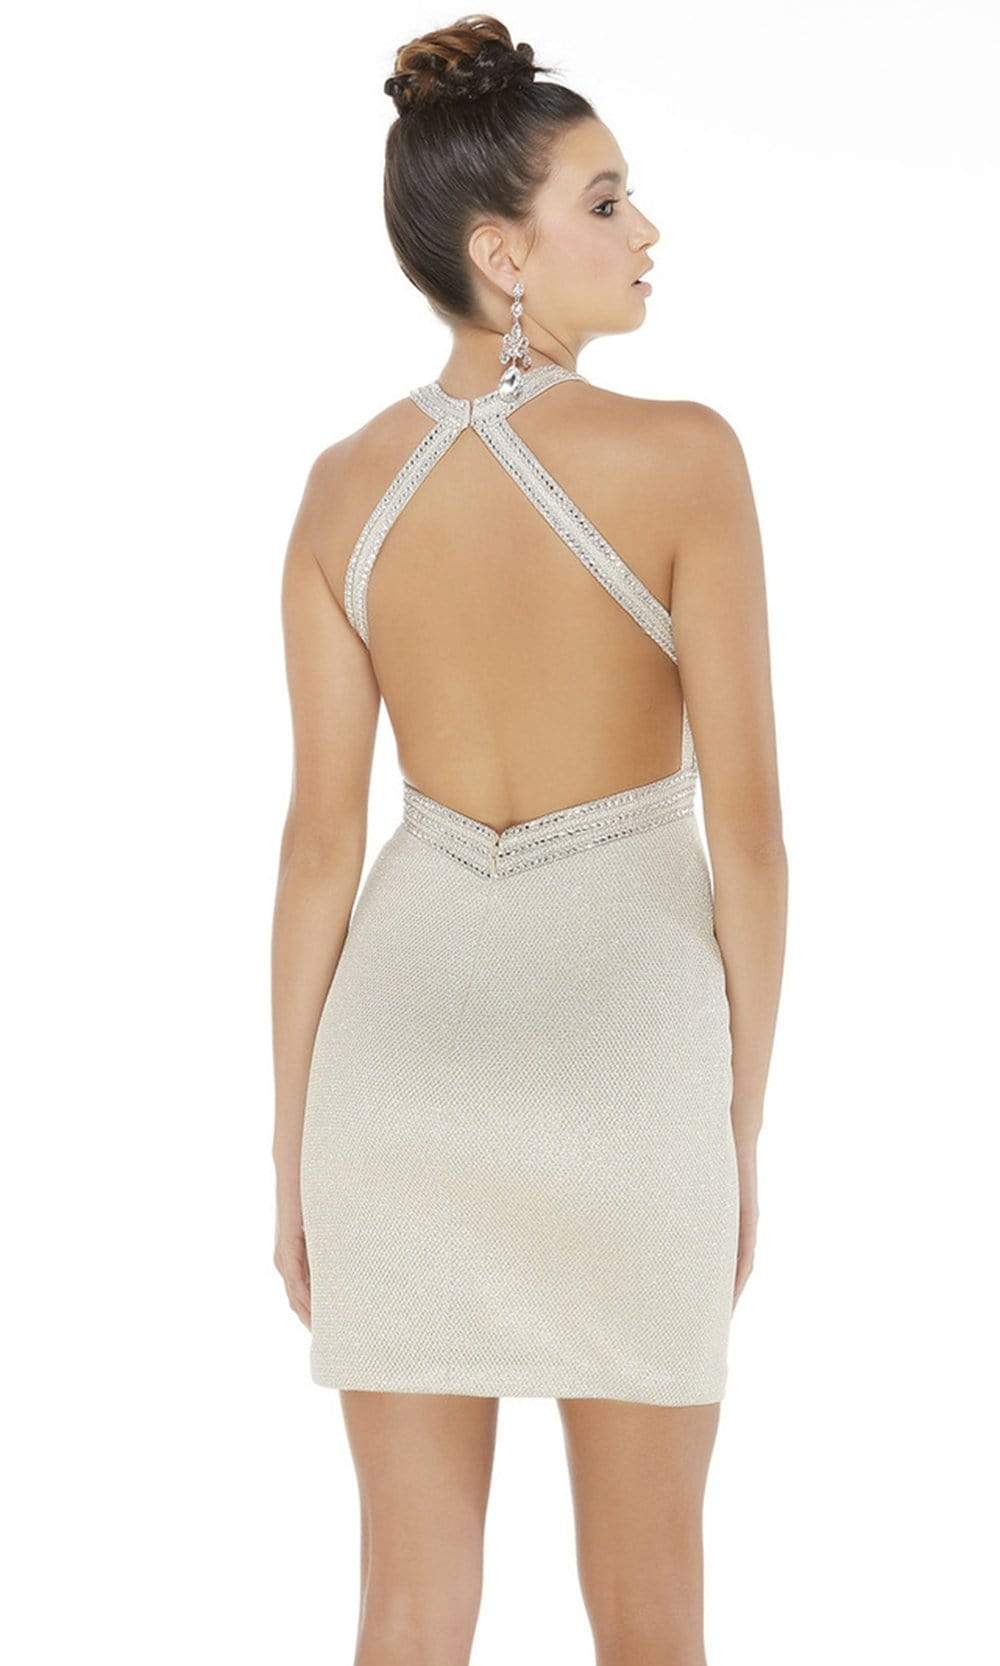 Alyce Paris - Embellished Sleeveless Open Back Cocktail Dress 4249SC In Neutral